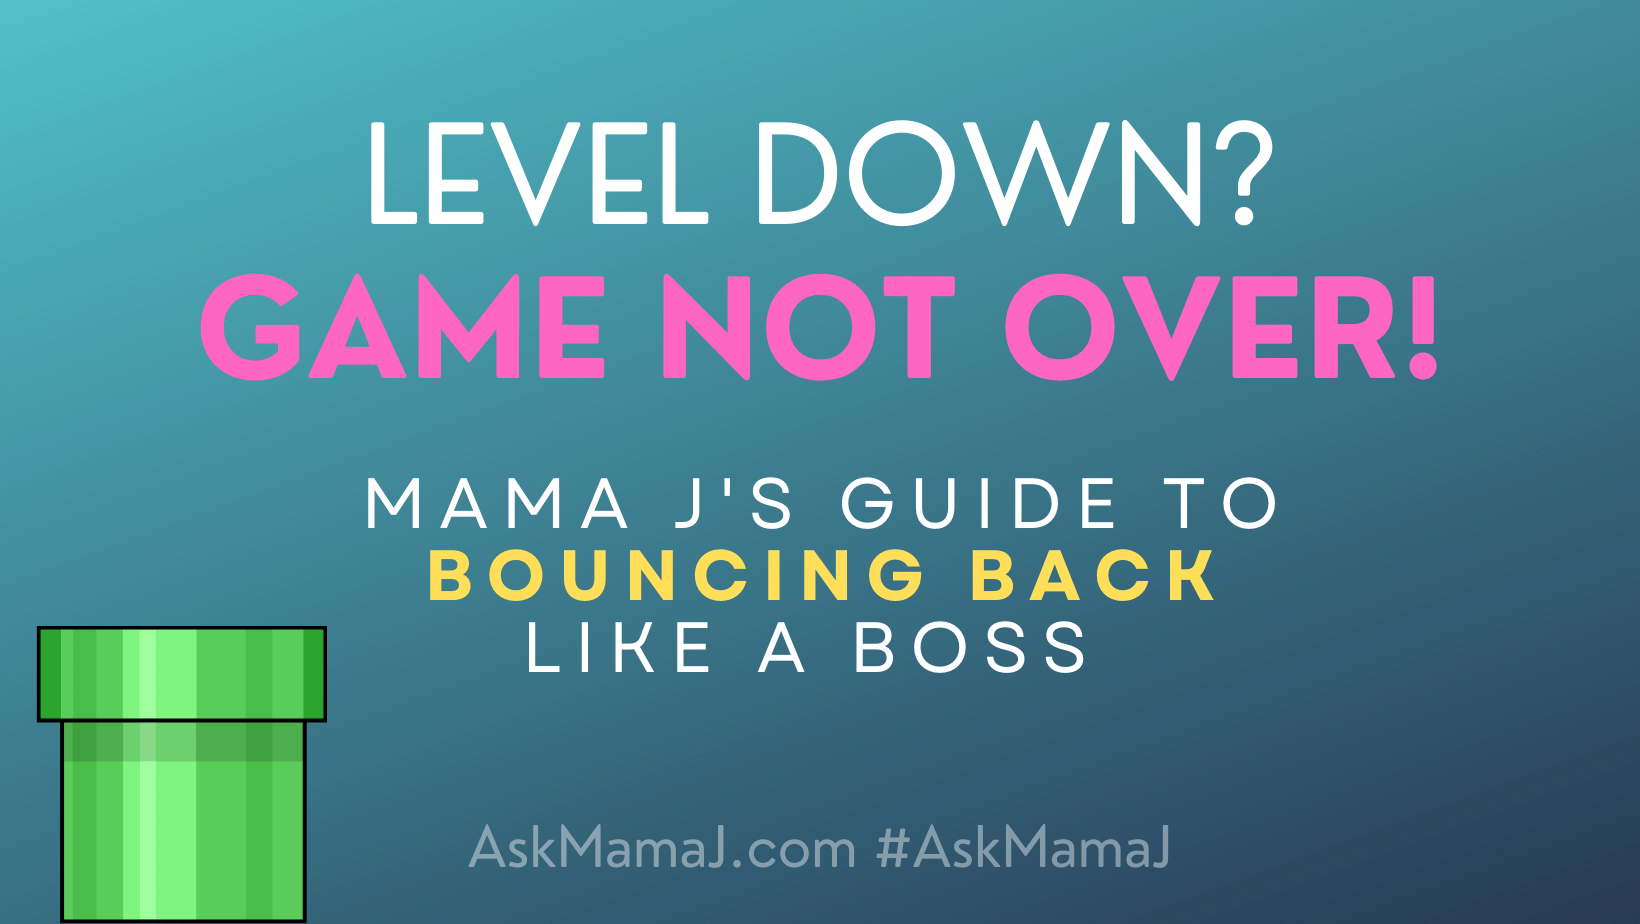 Level Down? Game Not Over! How to Bounce Back from Setbacks Like a Boss